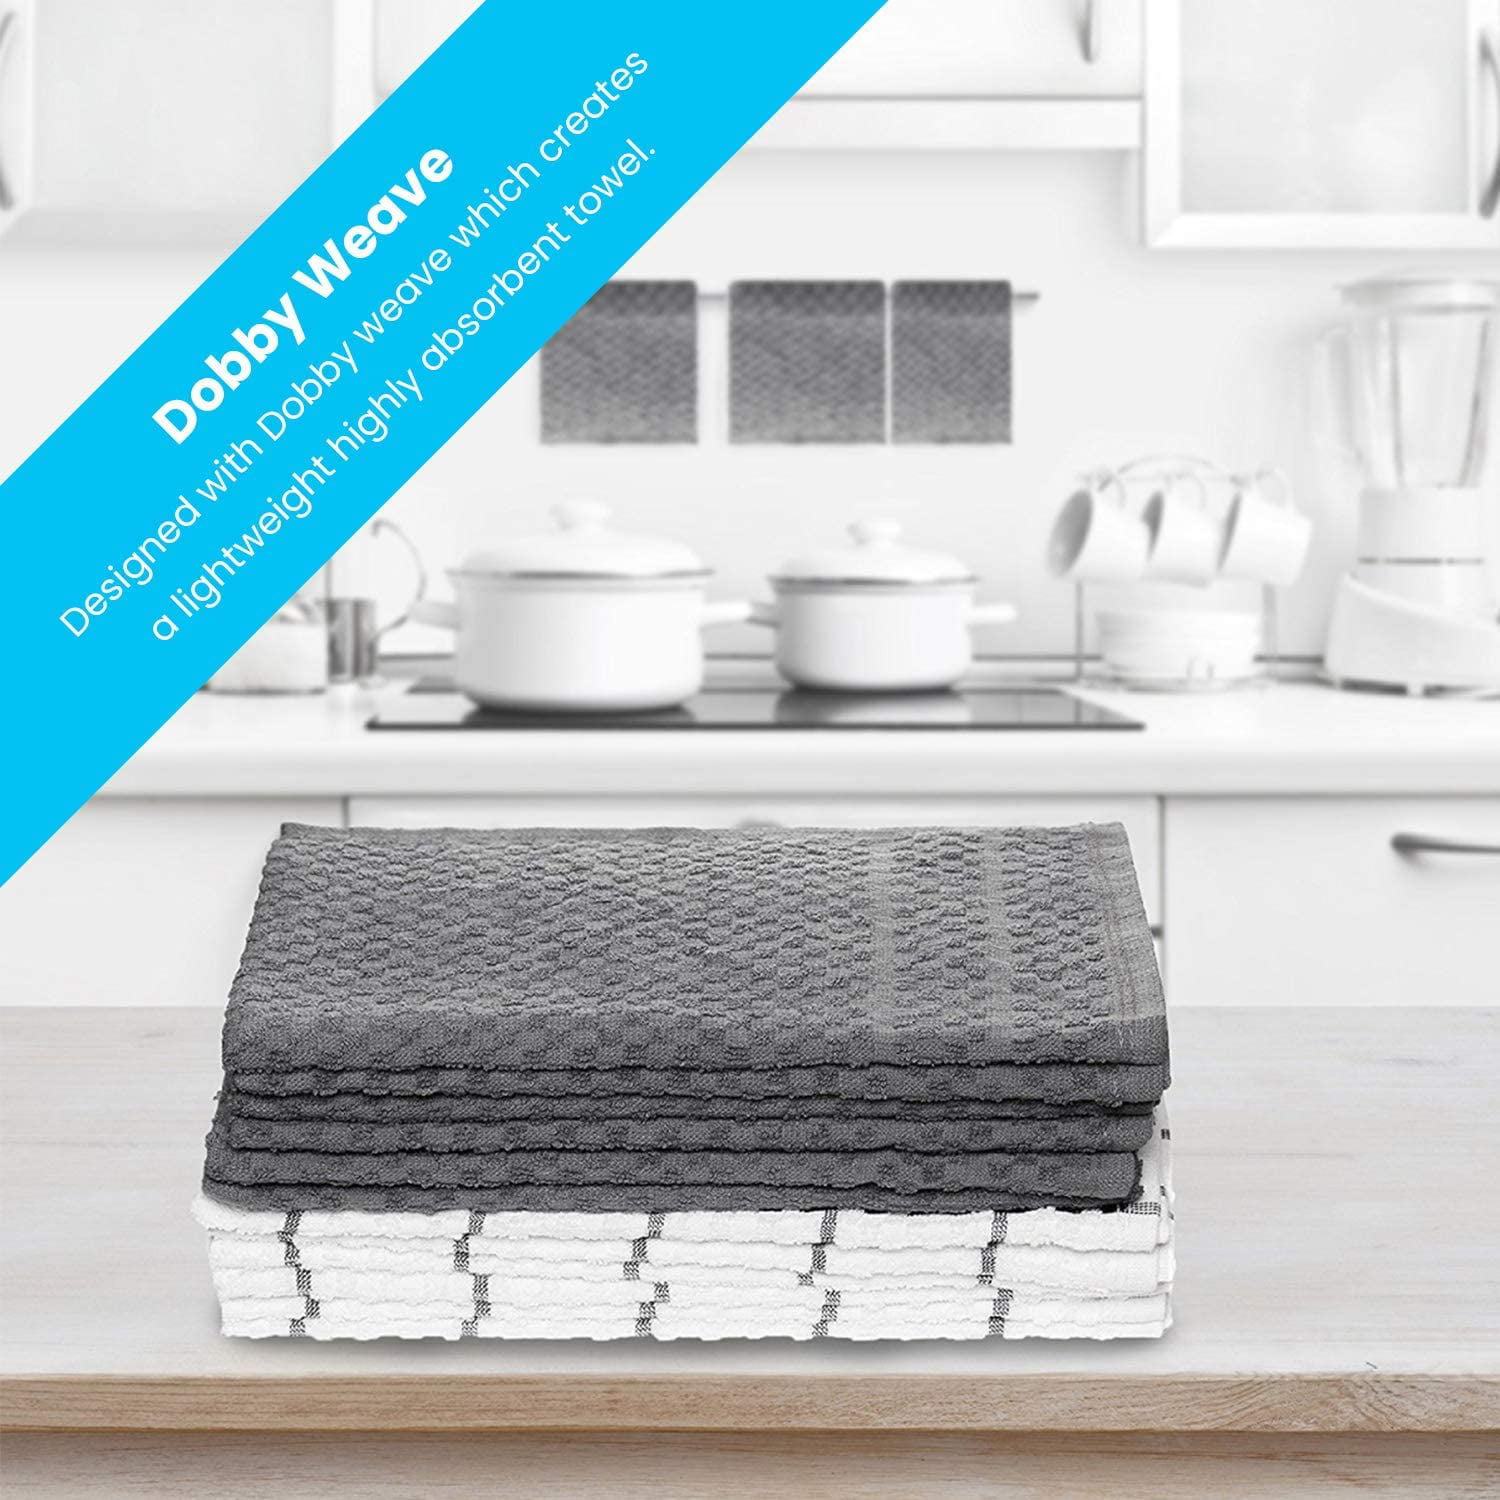  Zeppoli Kitchen Hand Towels 12 Pack - 100% Soft Cotton - 15 x  25 - Dobby Weave - Gray Dish Towels for - Super Absorbent Cleaning Cloths:  Home & Kitchen